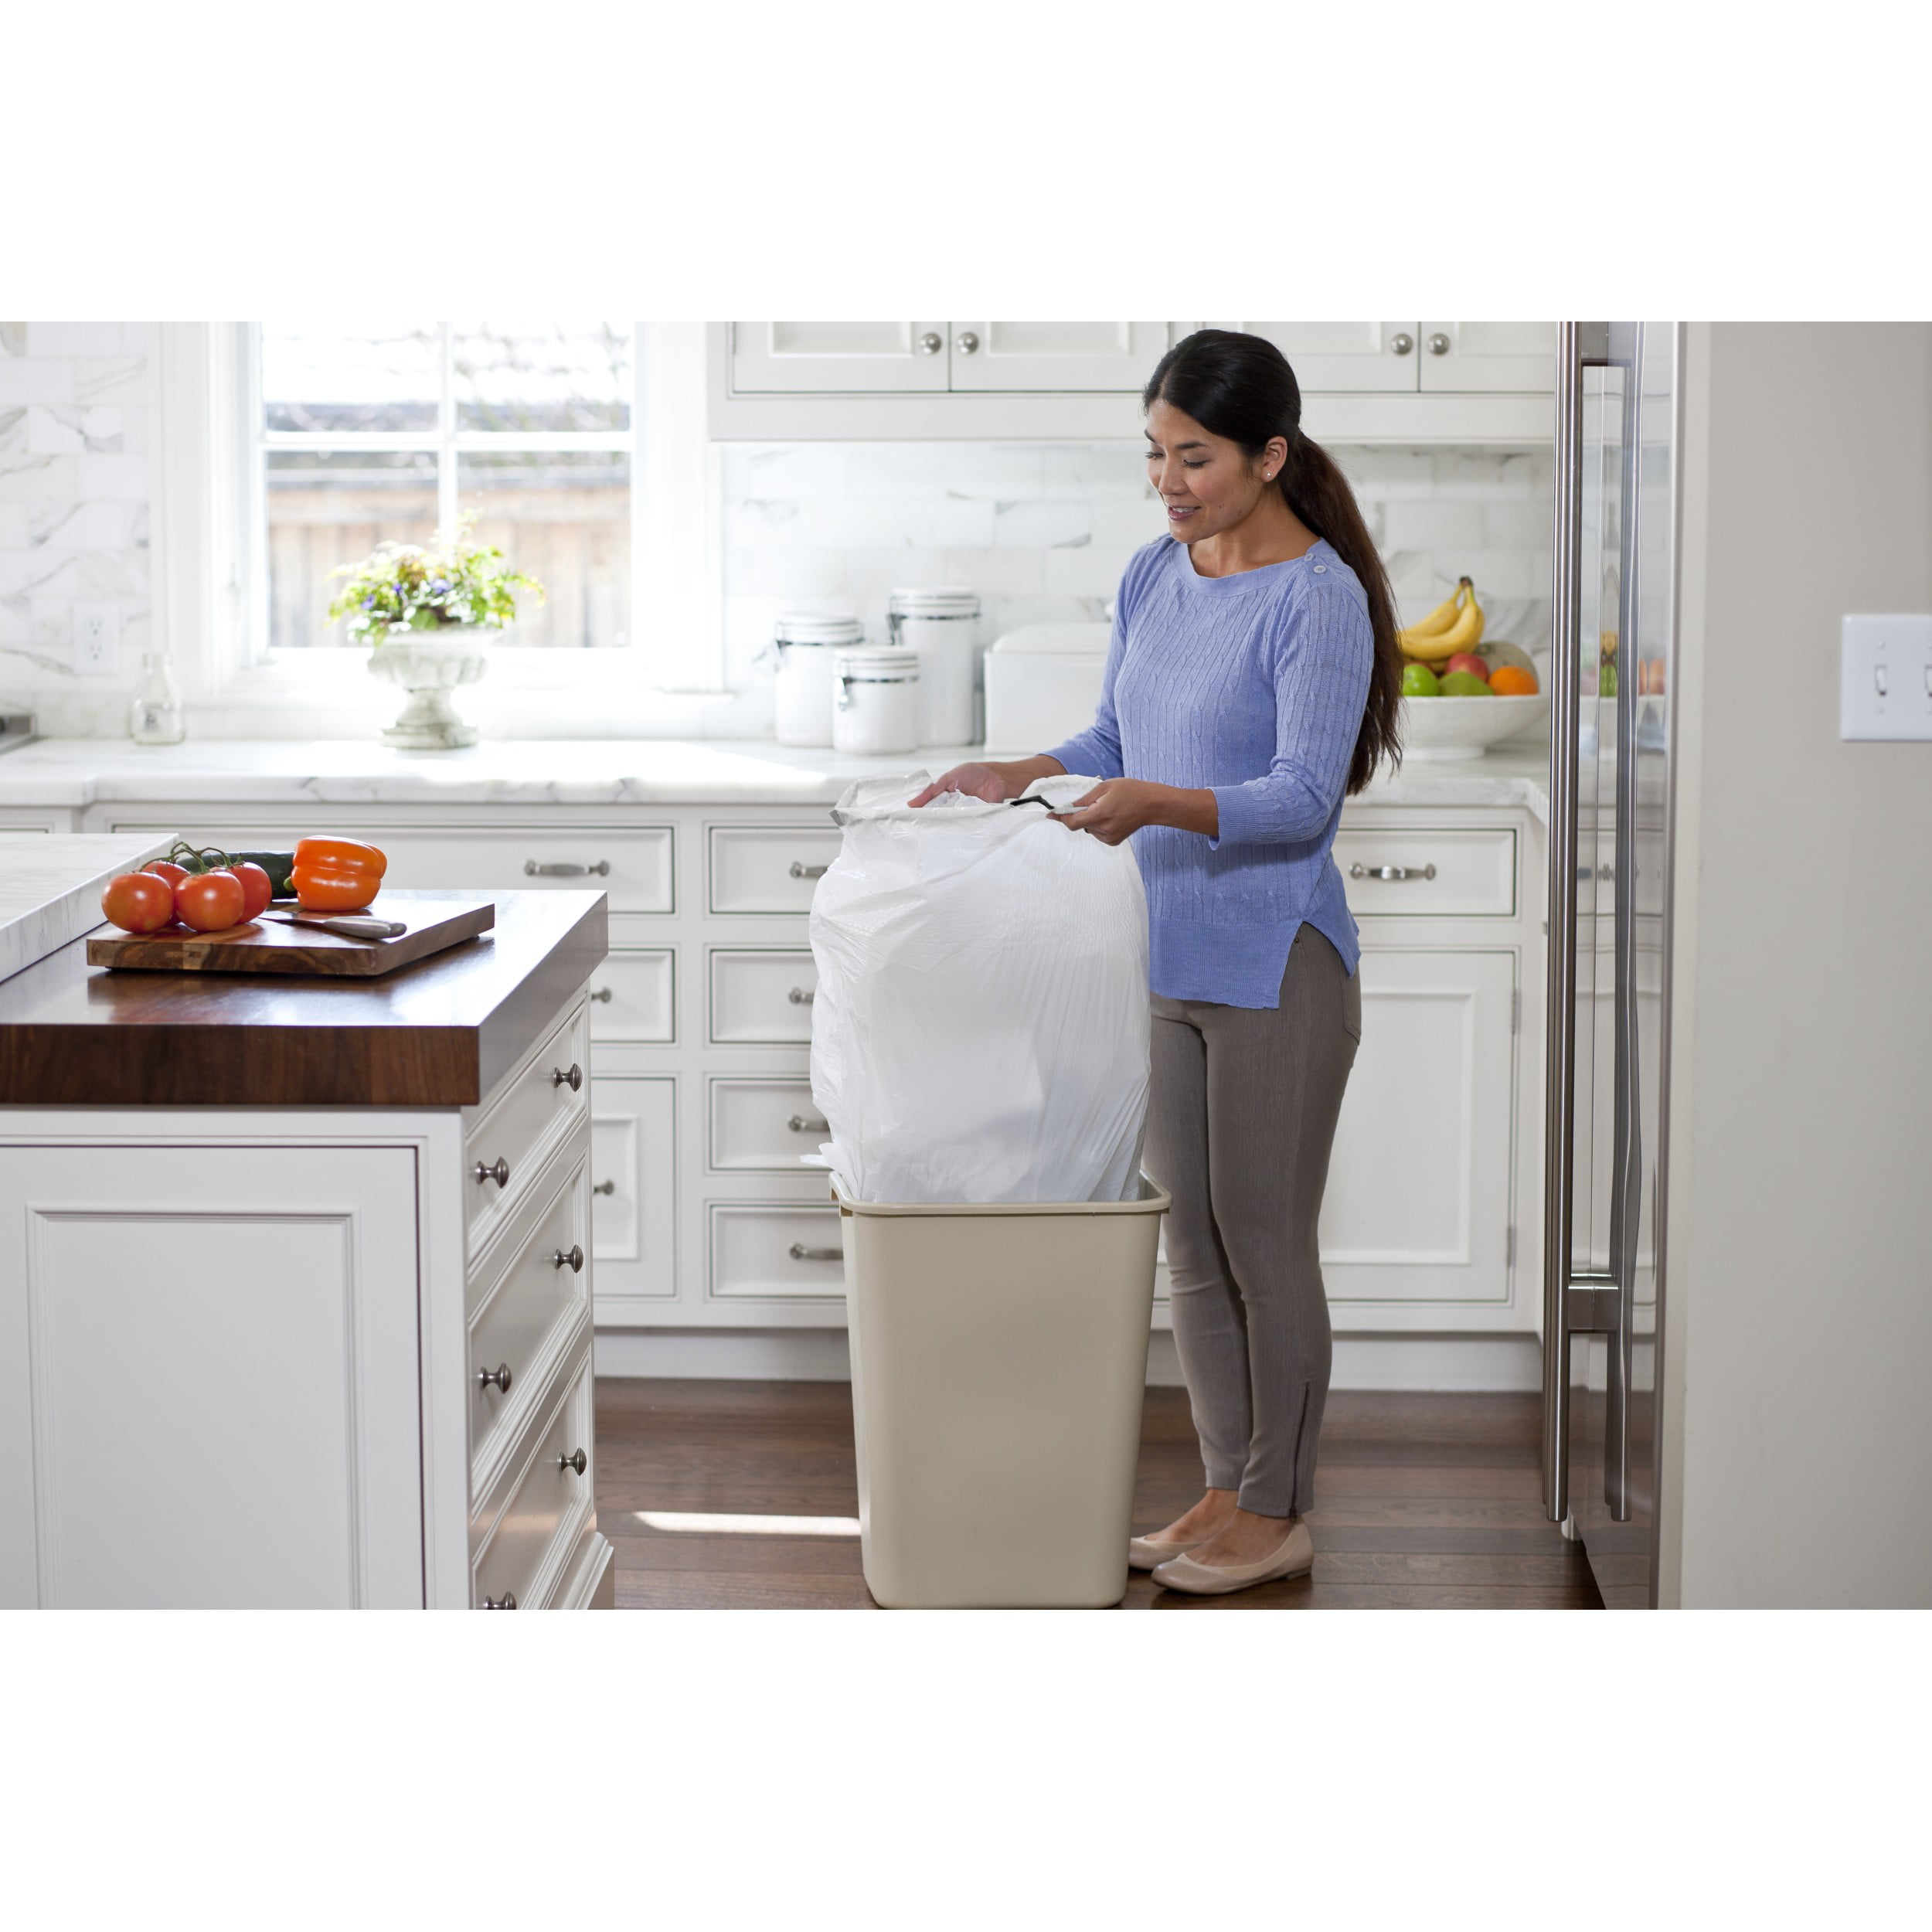 Life Goods Happy Home 13 Gallon Drawstring Tall Kitchen Bags, 22 Ct, 1 -  City Market